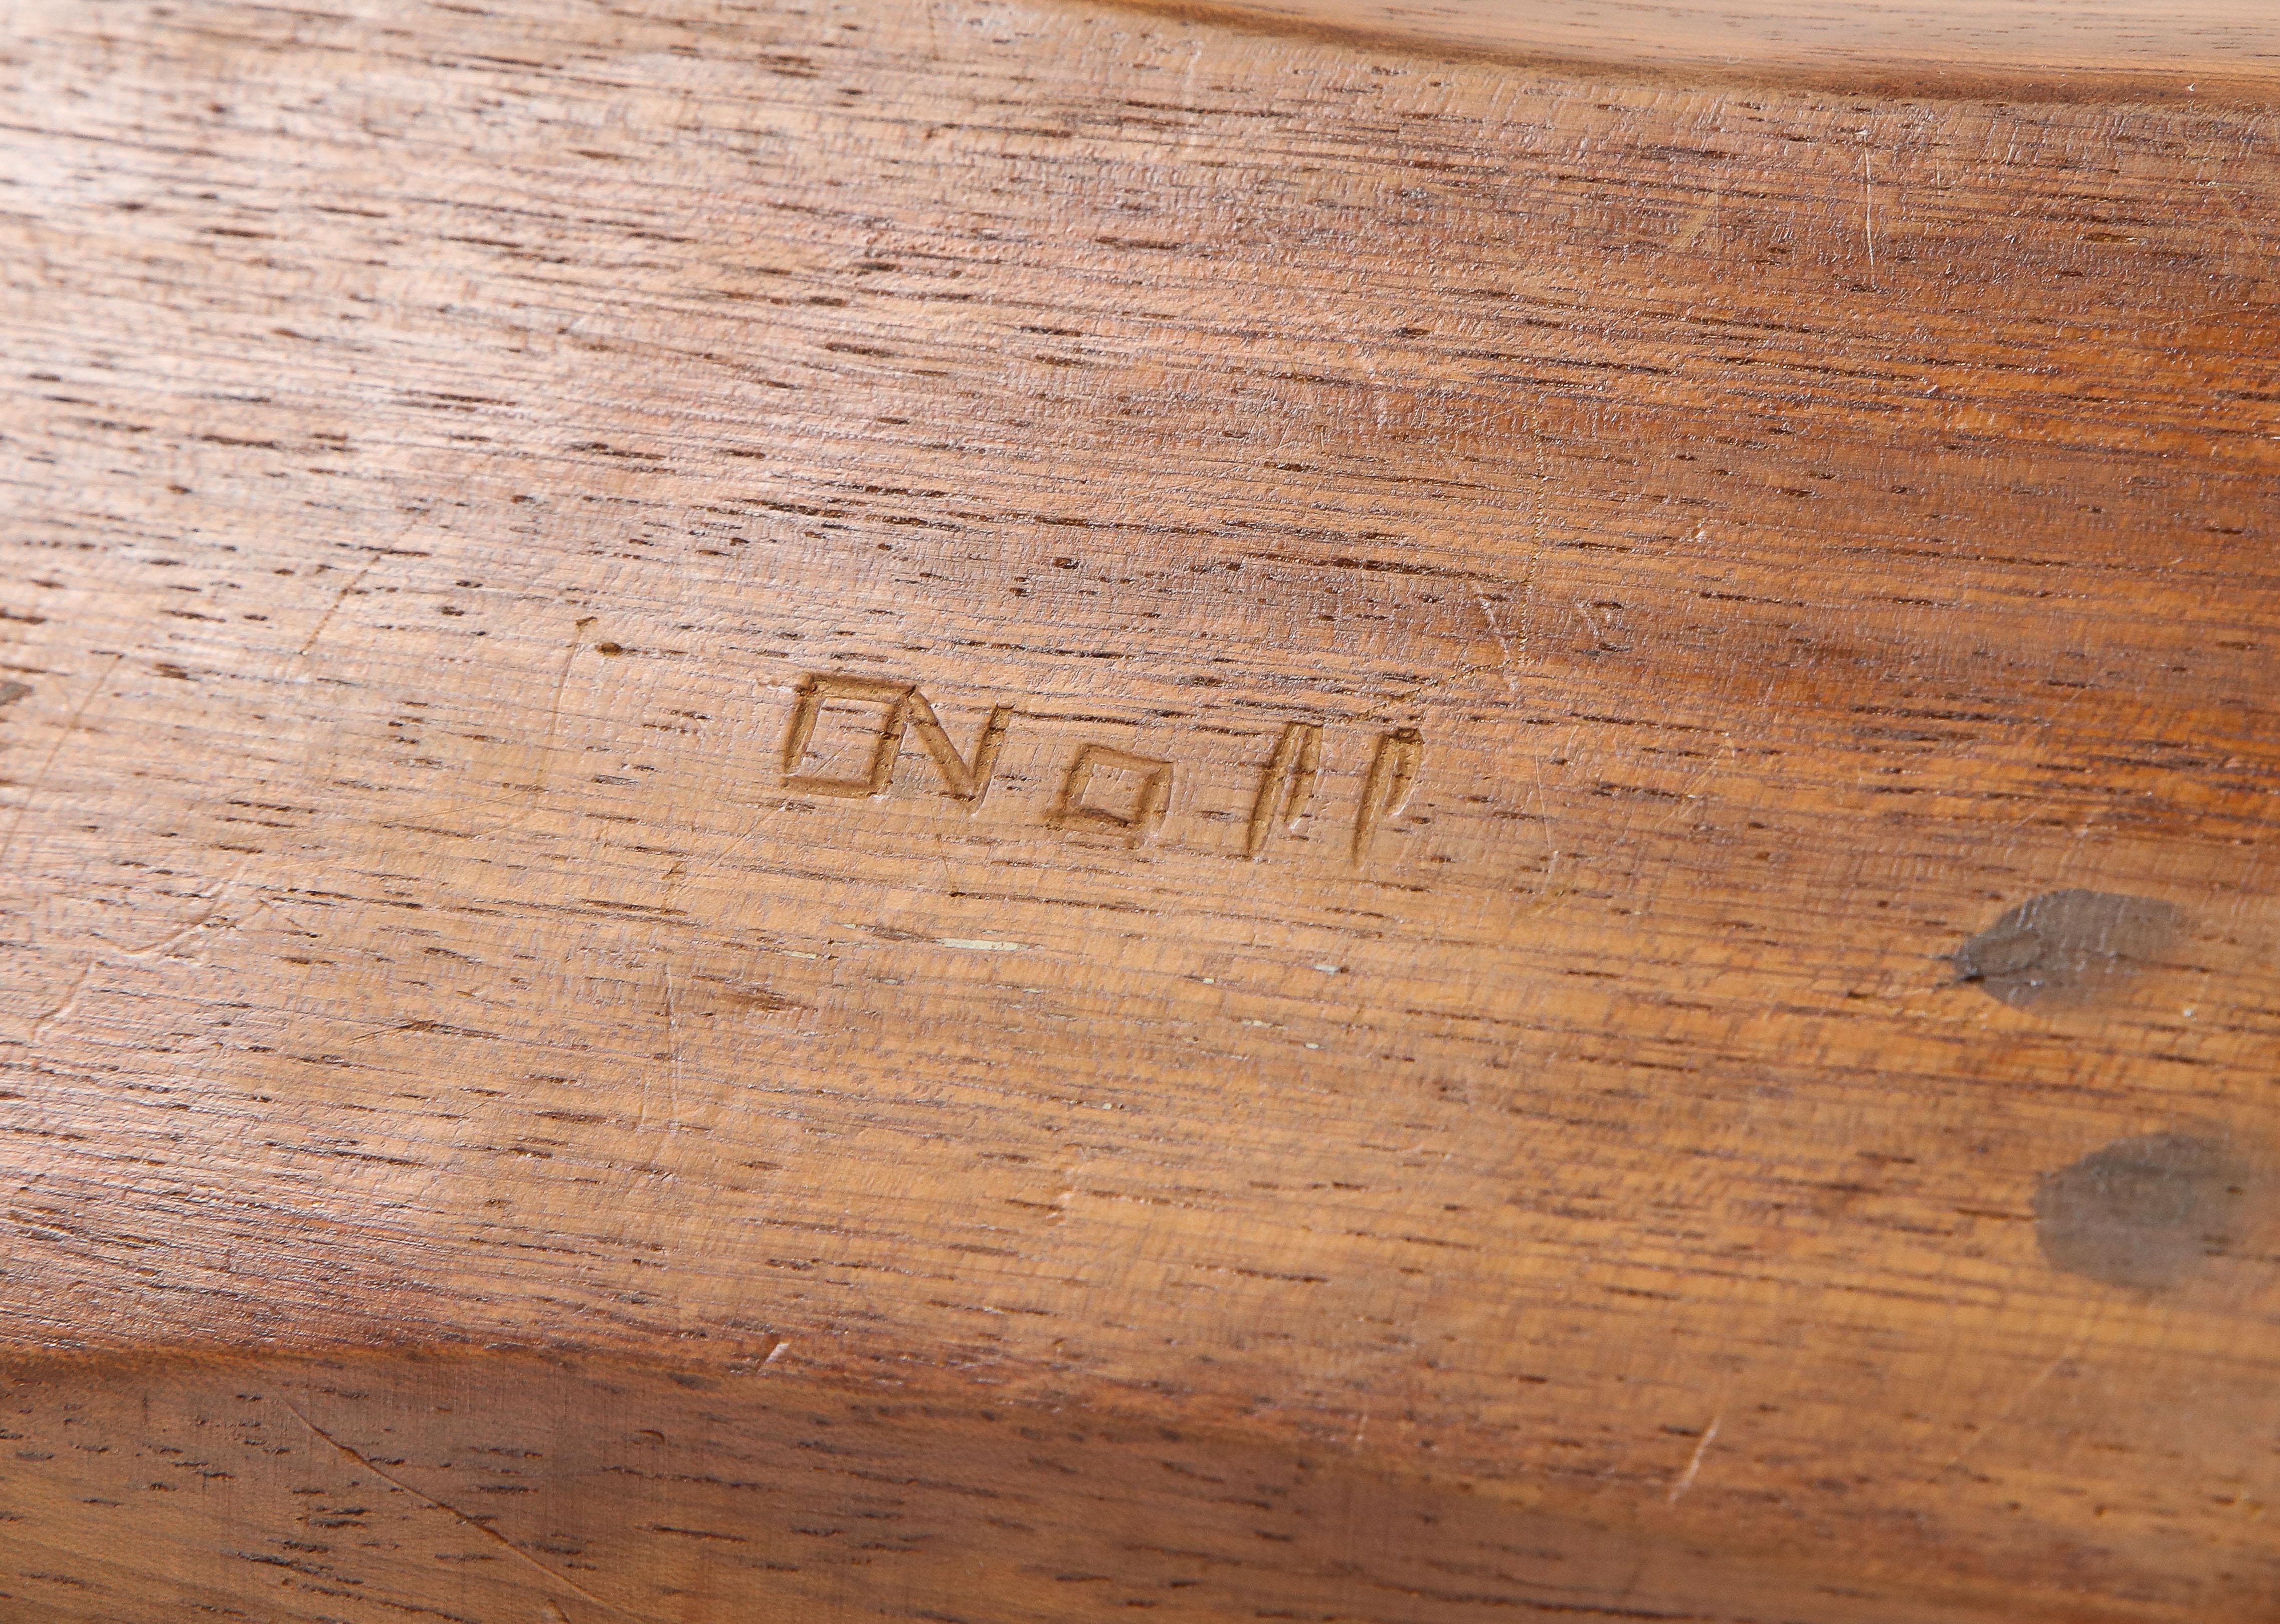 Odile Noll Rosewood Plate, Signed, France, circa 1950 6